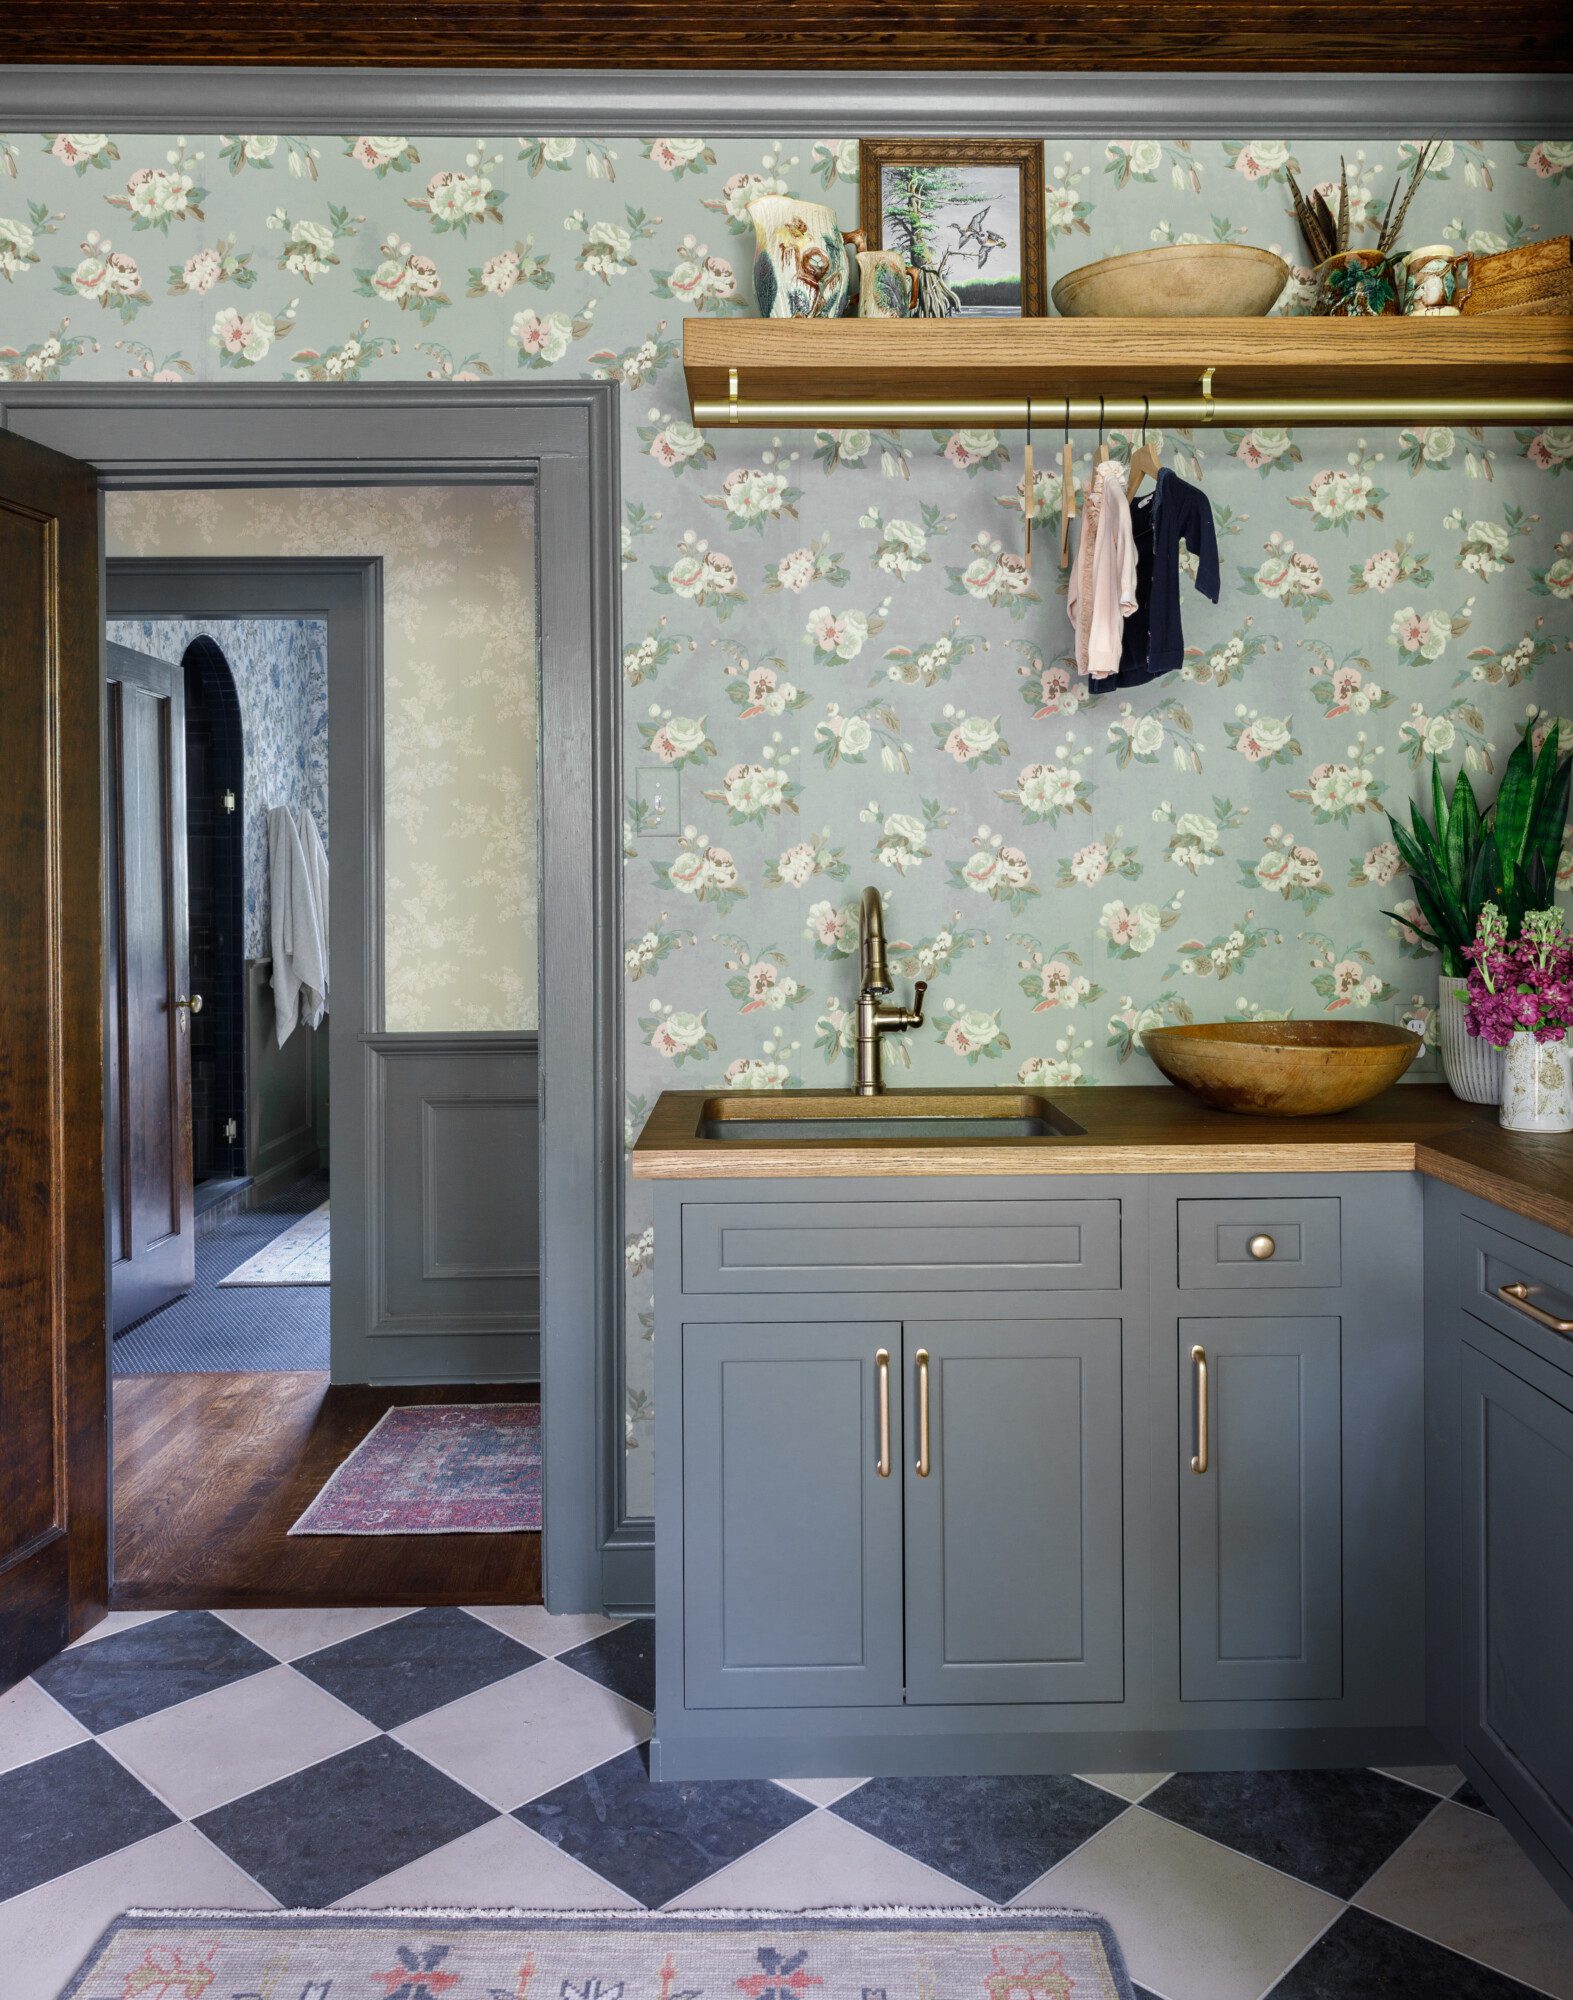 Laundry room with green cabinets, flower wallpaper and checkered floor